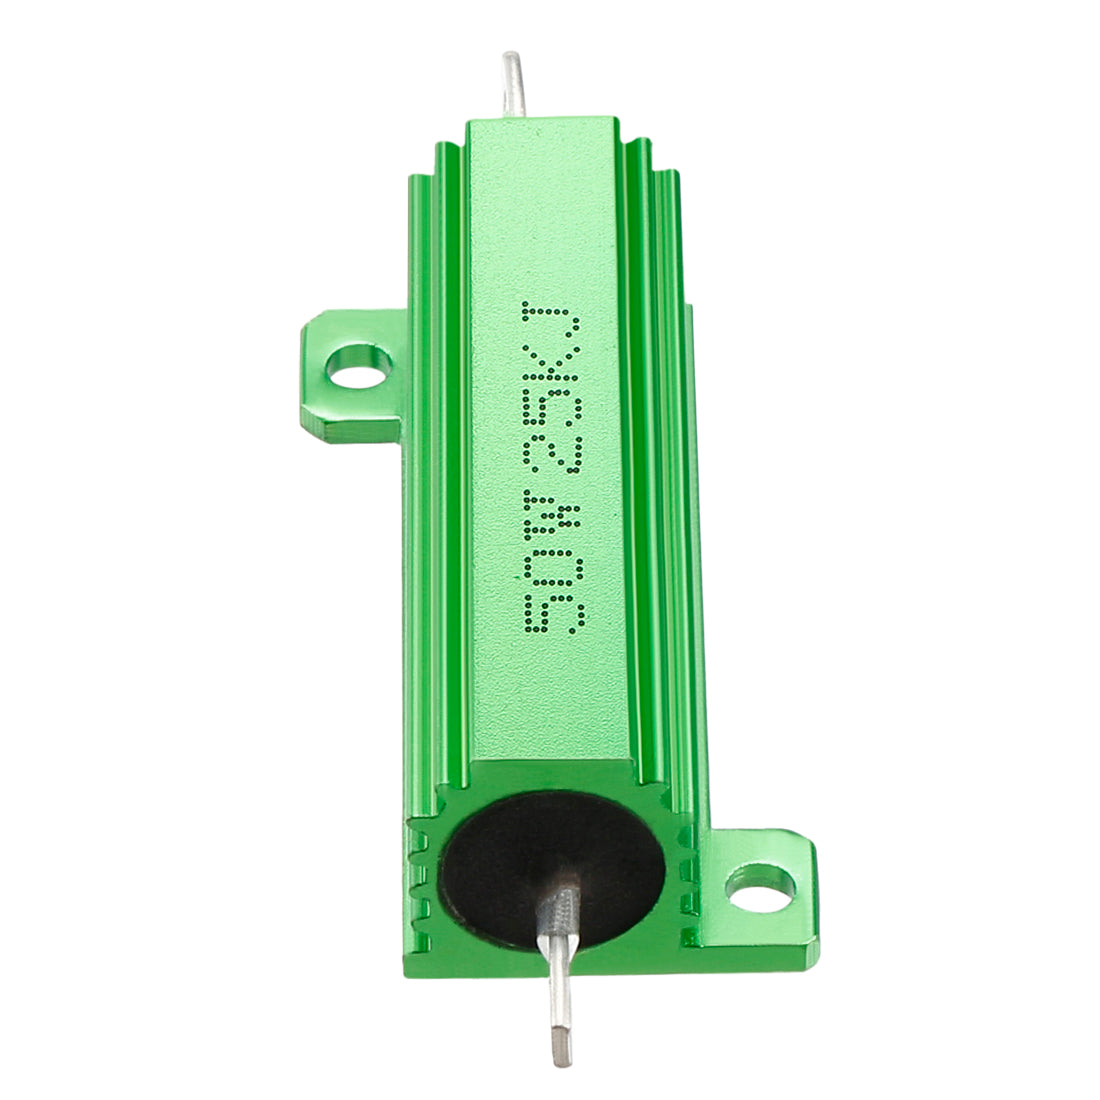 uxcell Uxcell 50W 25k Ohm 5% Aluminum Housing Resistor Screw  Chassis Mounted Aluminum Case Wirewound Resistor Load Resistors Green 2 pcs